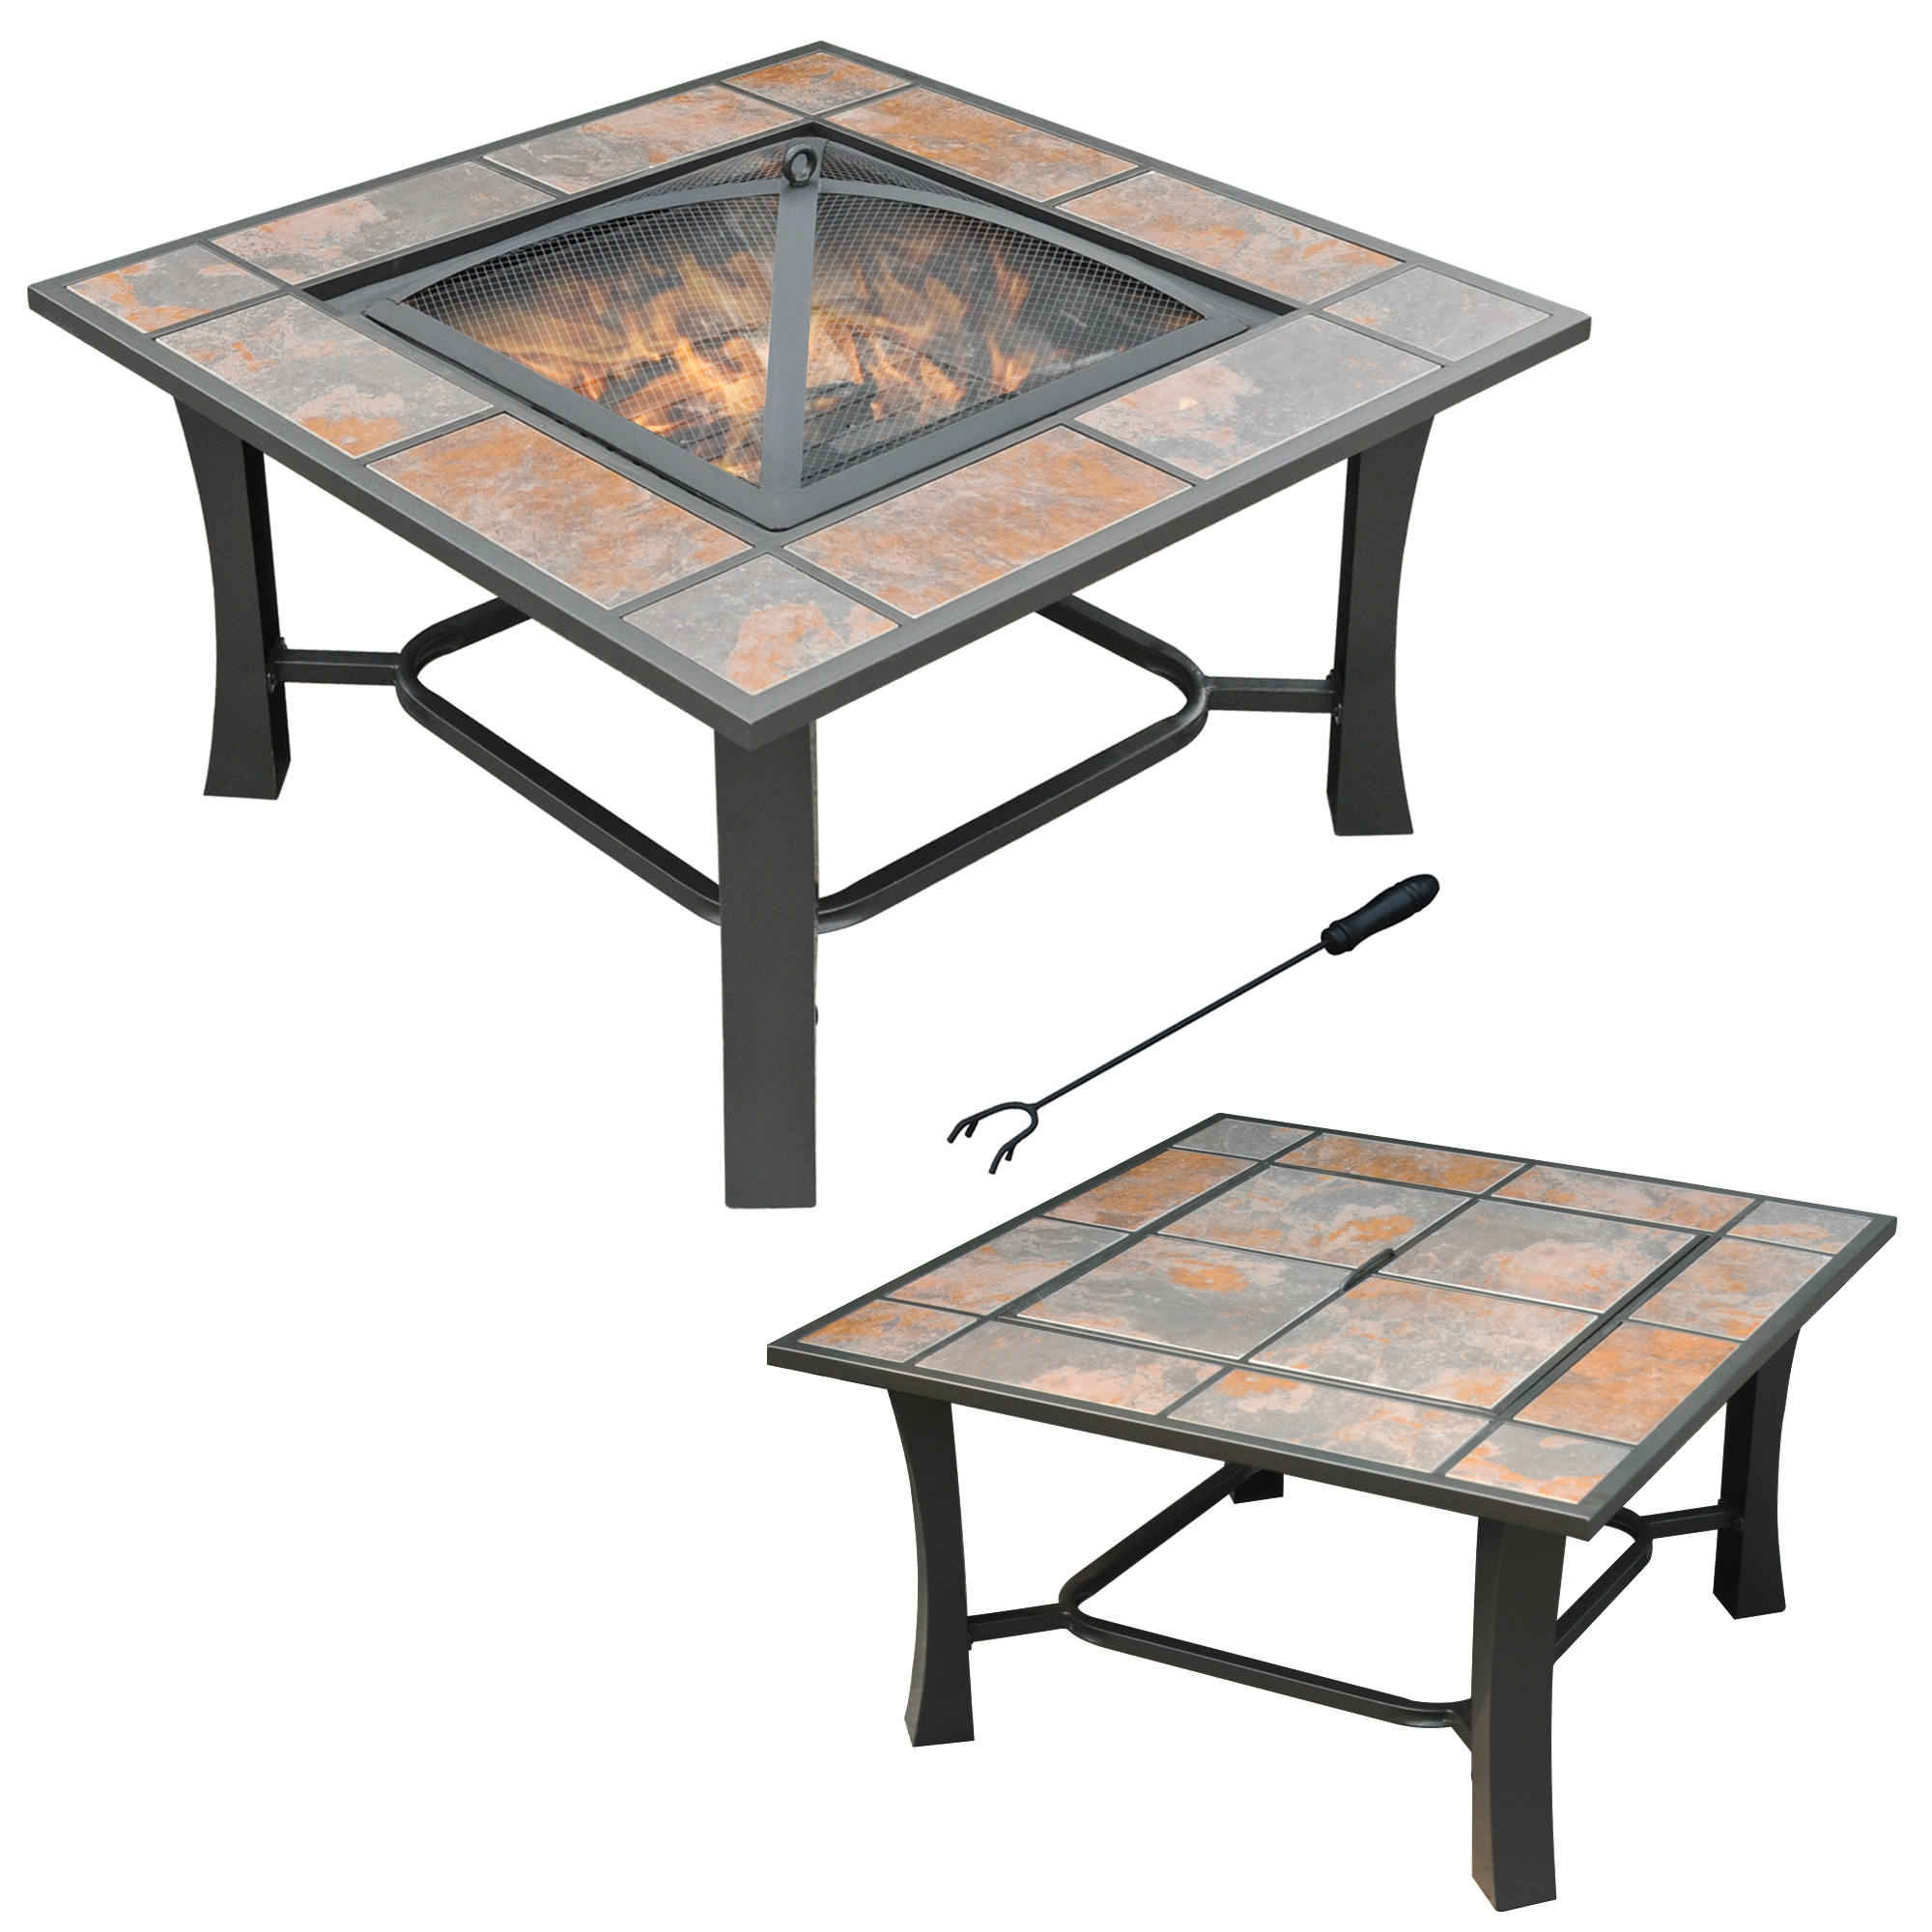 Axxonn 32", 2-in-1 Malaga Convertible Square Tile Top Fire Pit, Coffee Table wood burning Fire Bowl - image 1 of 5